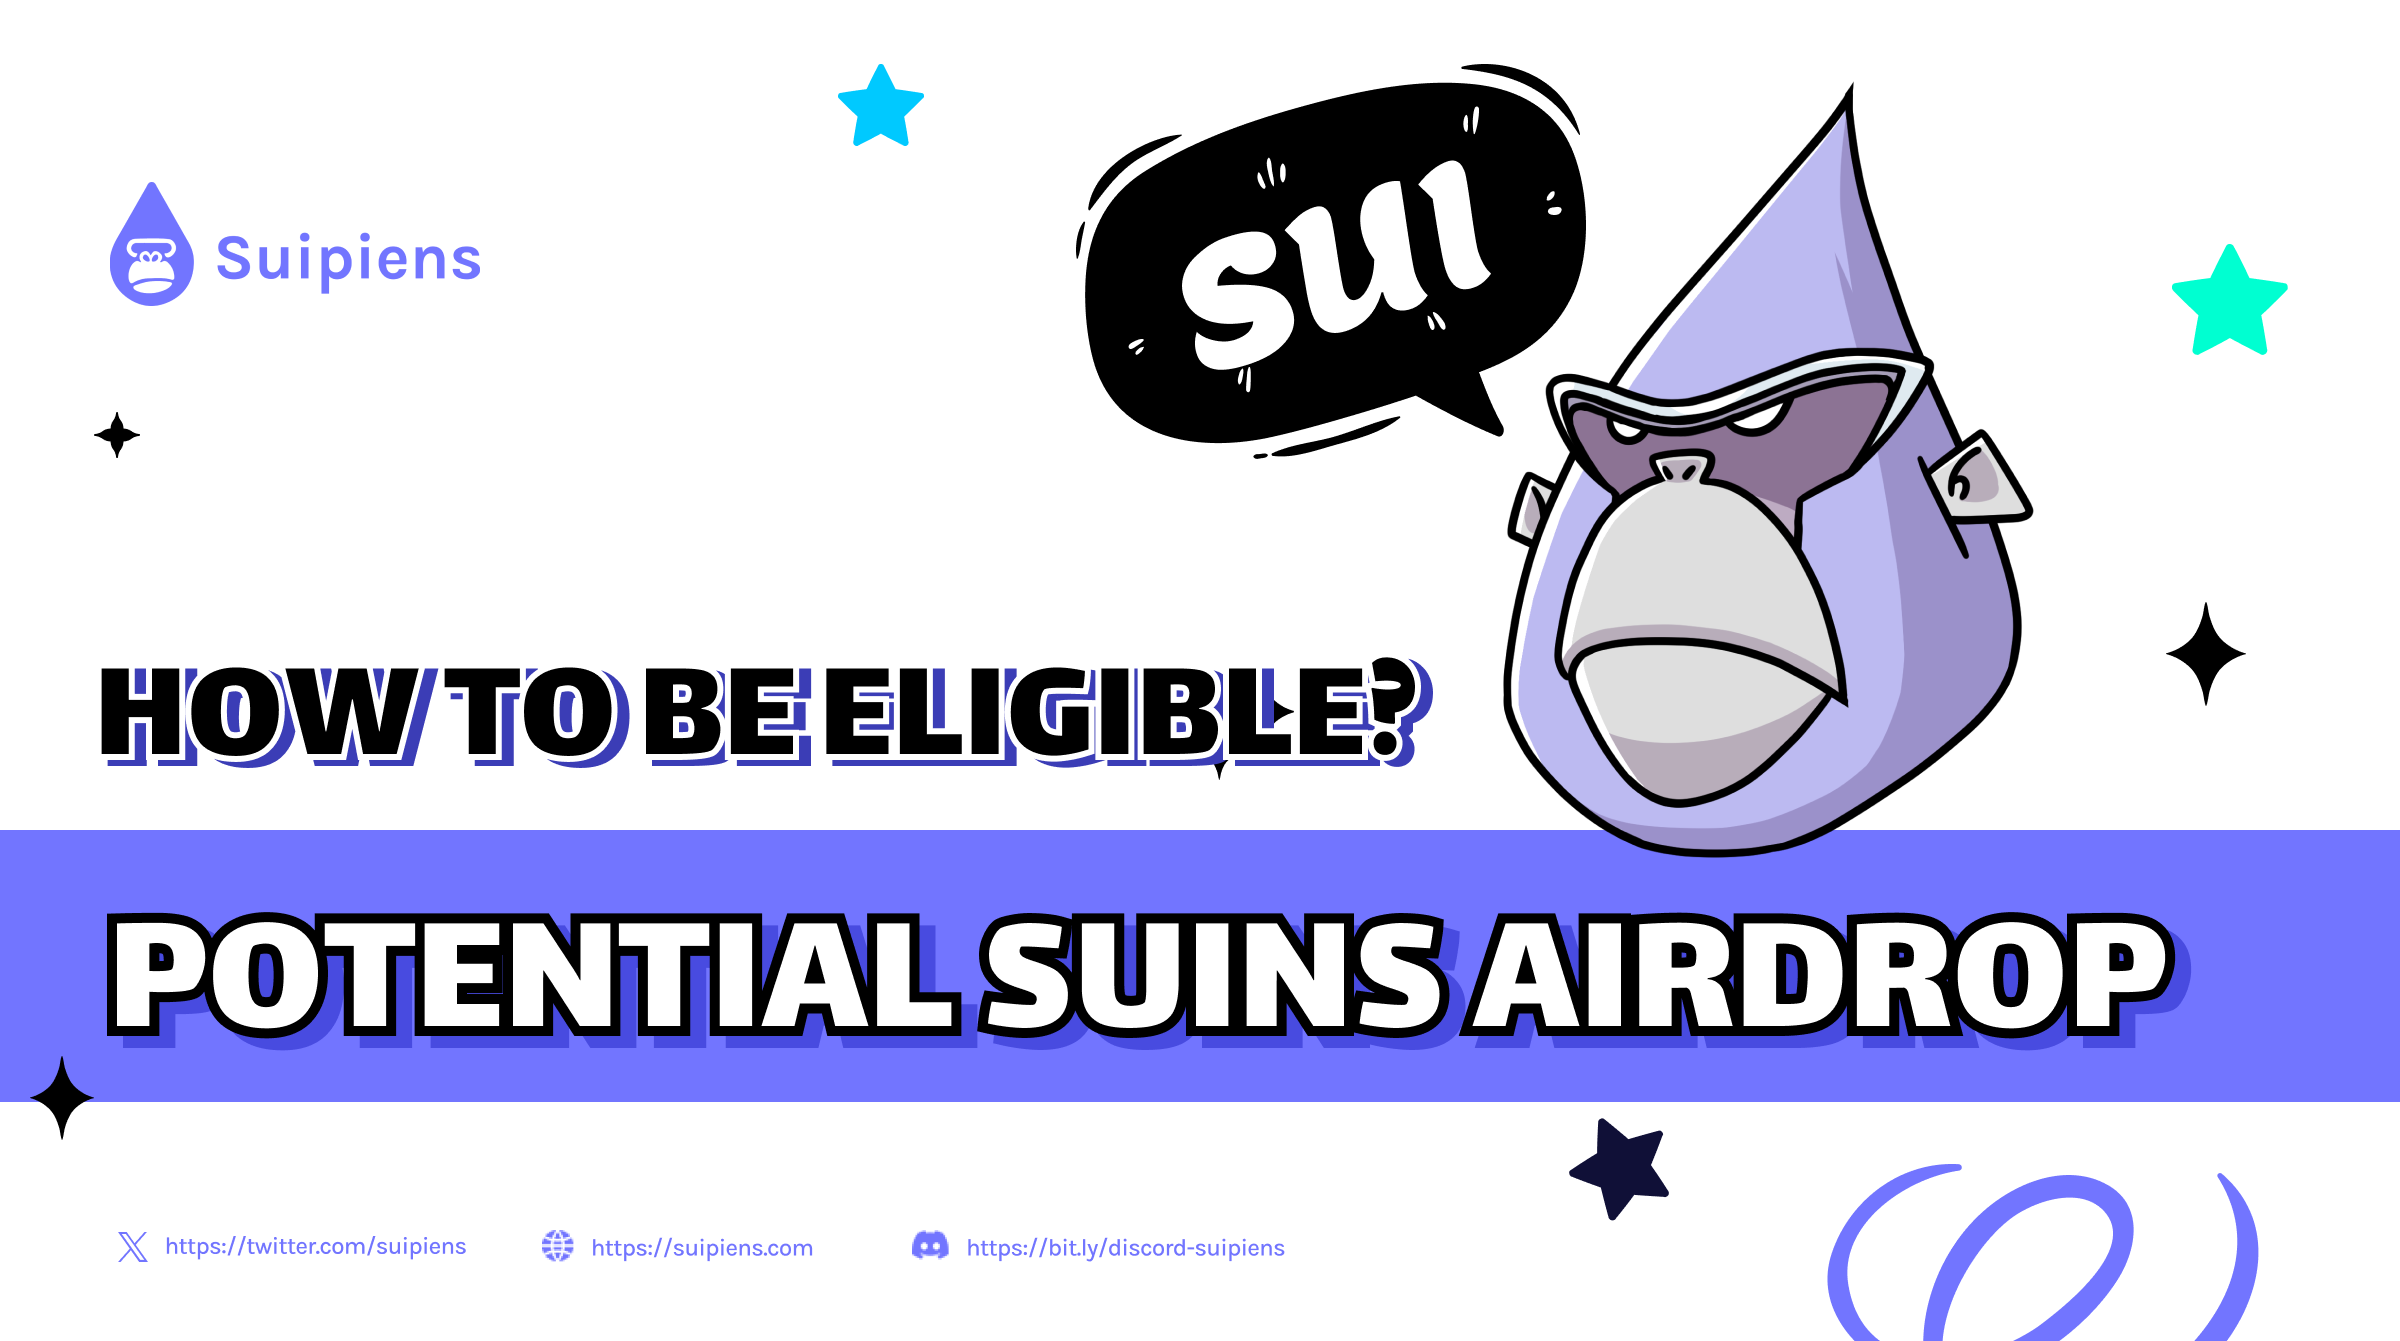 Potential SuiNS Airdrop ~ How to be eligible?